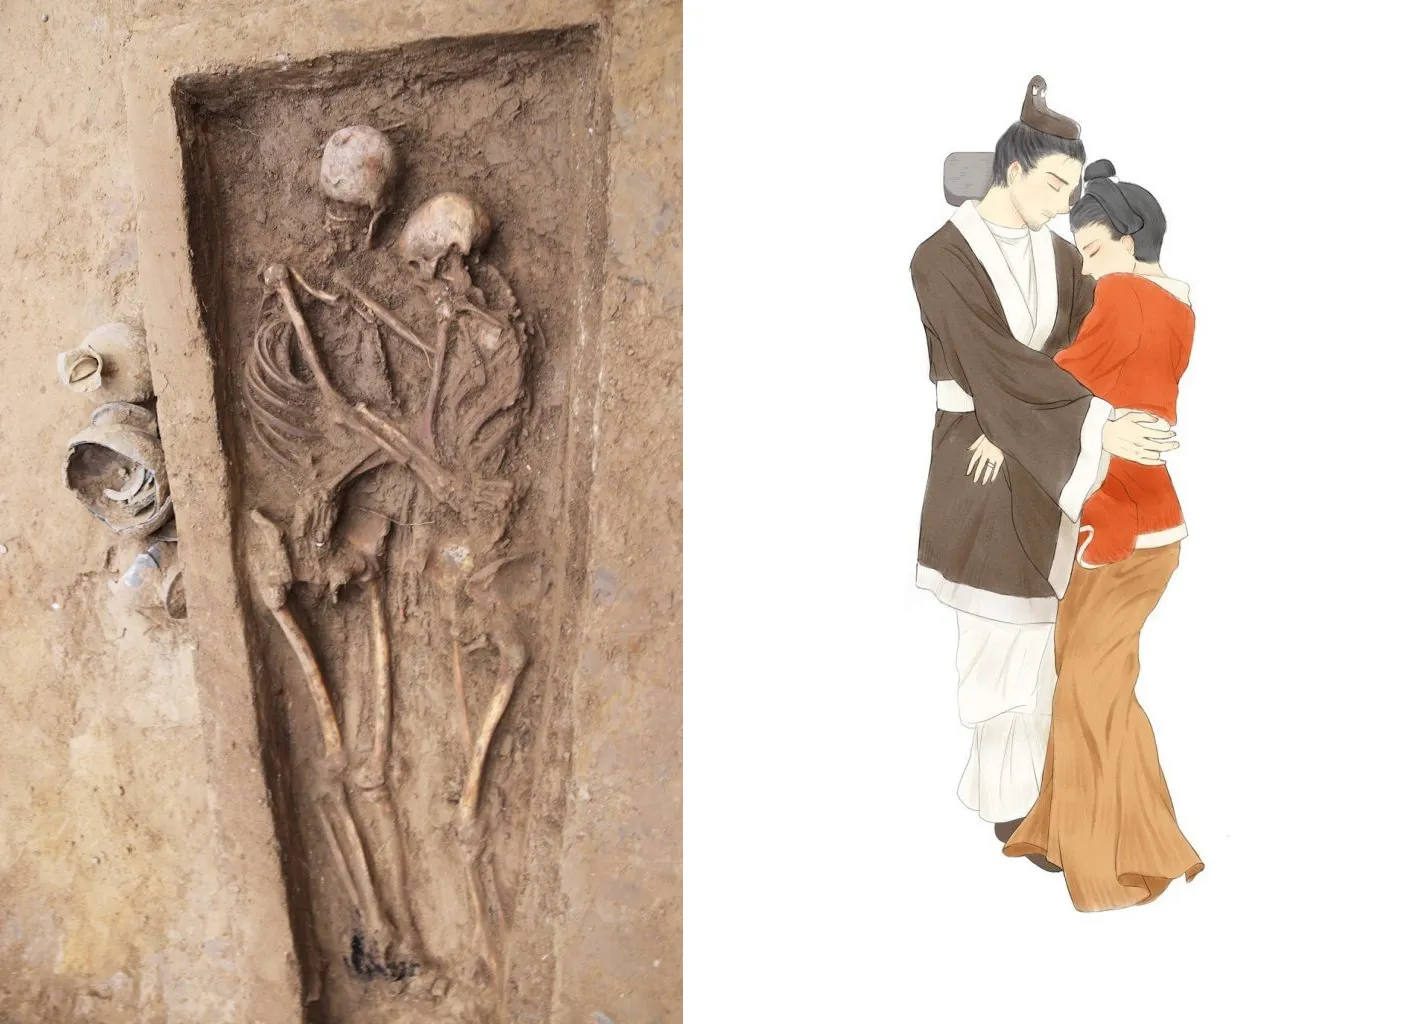 1,500-Year-Old Skeletons Found Locked in Embrace in Chinese